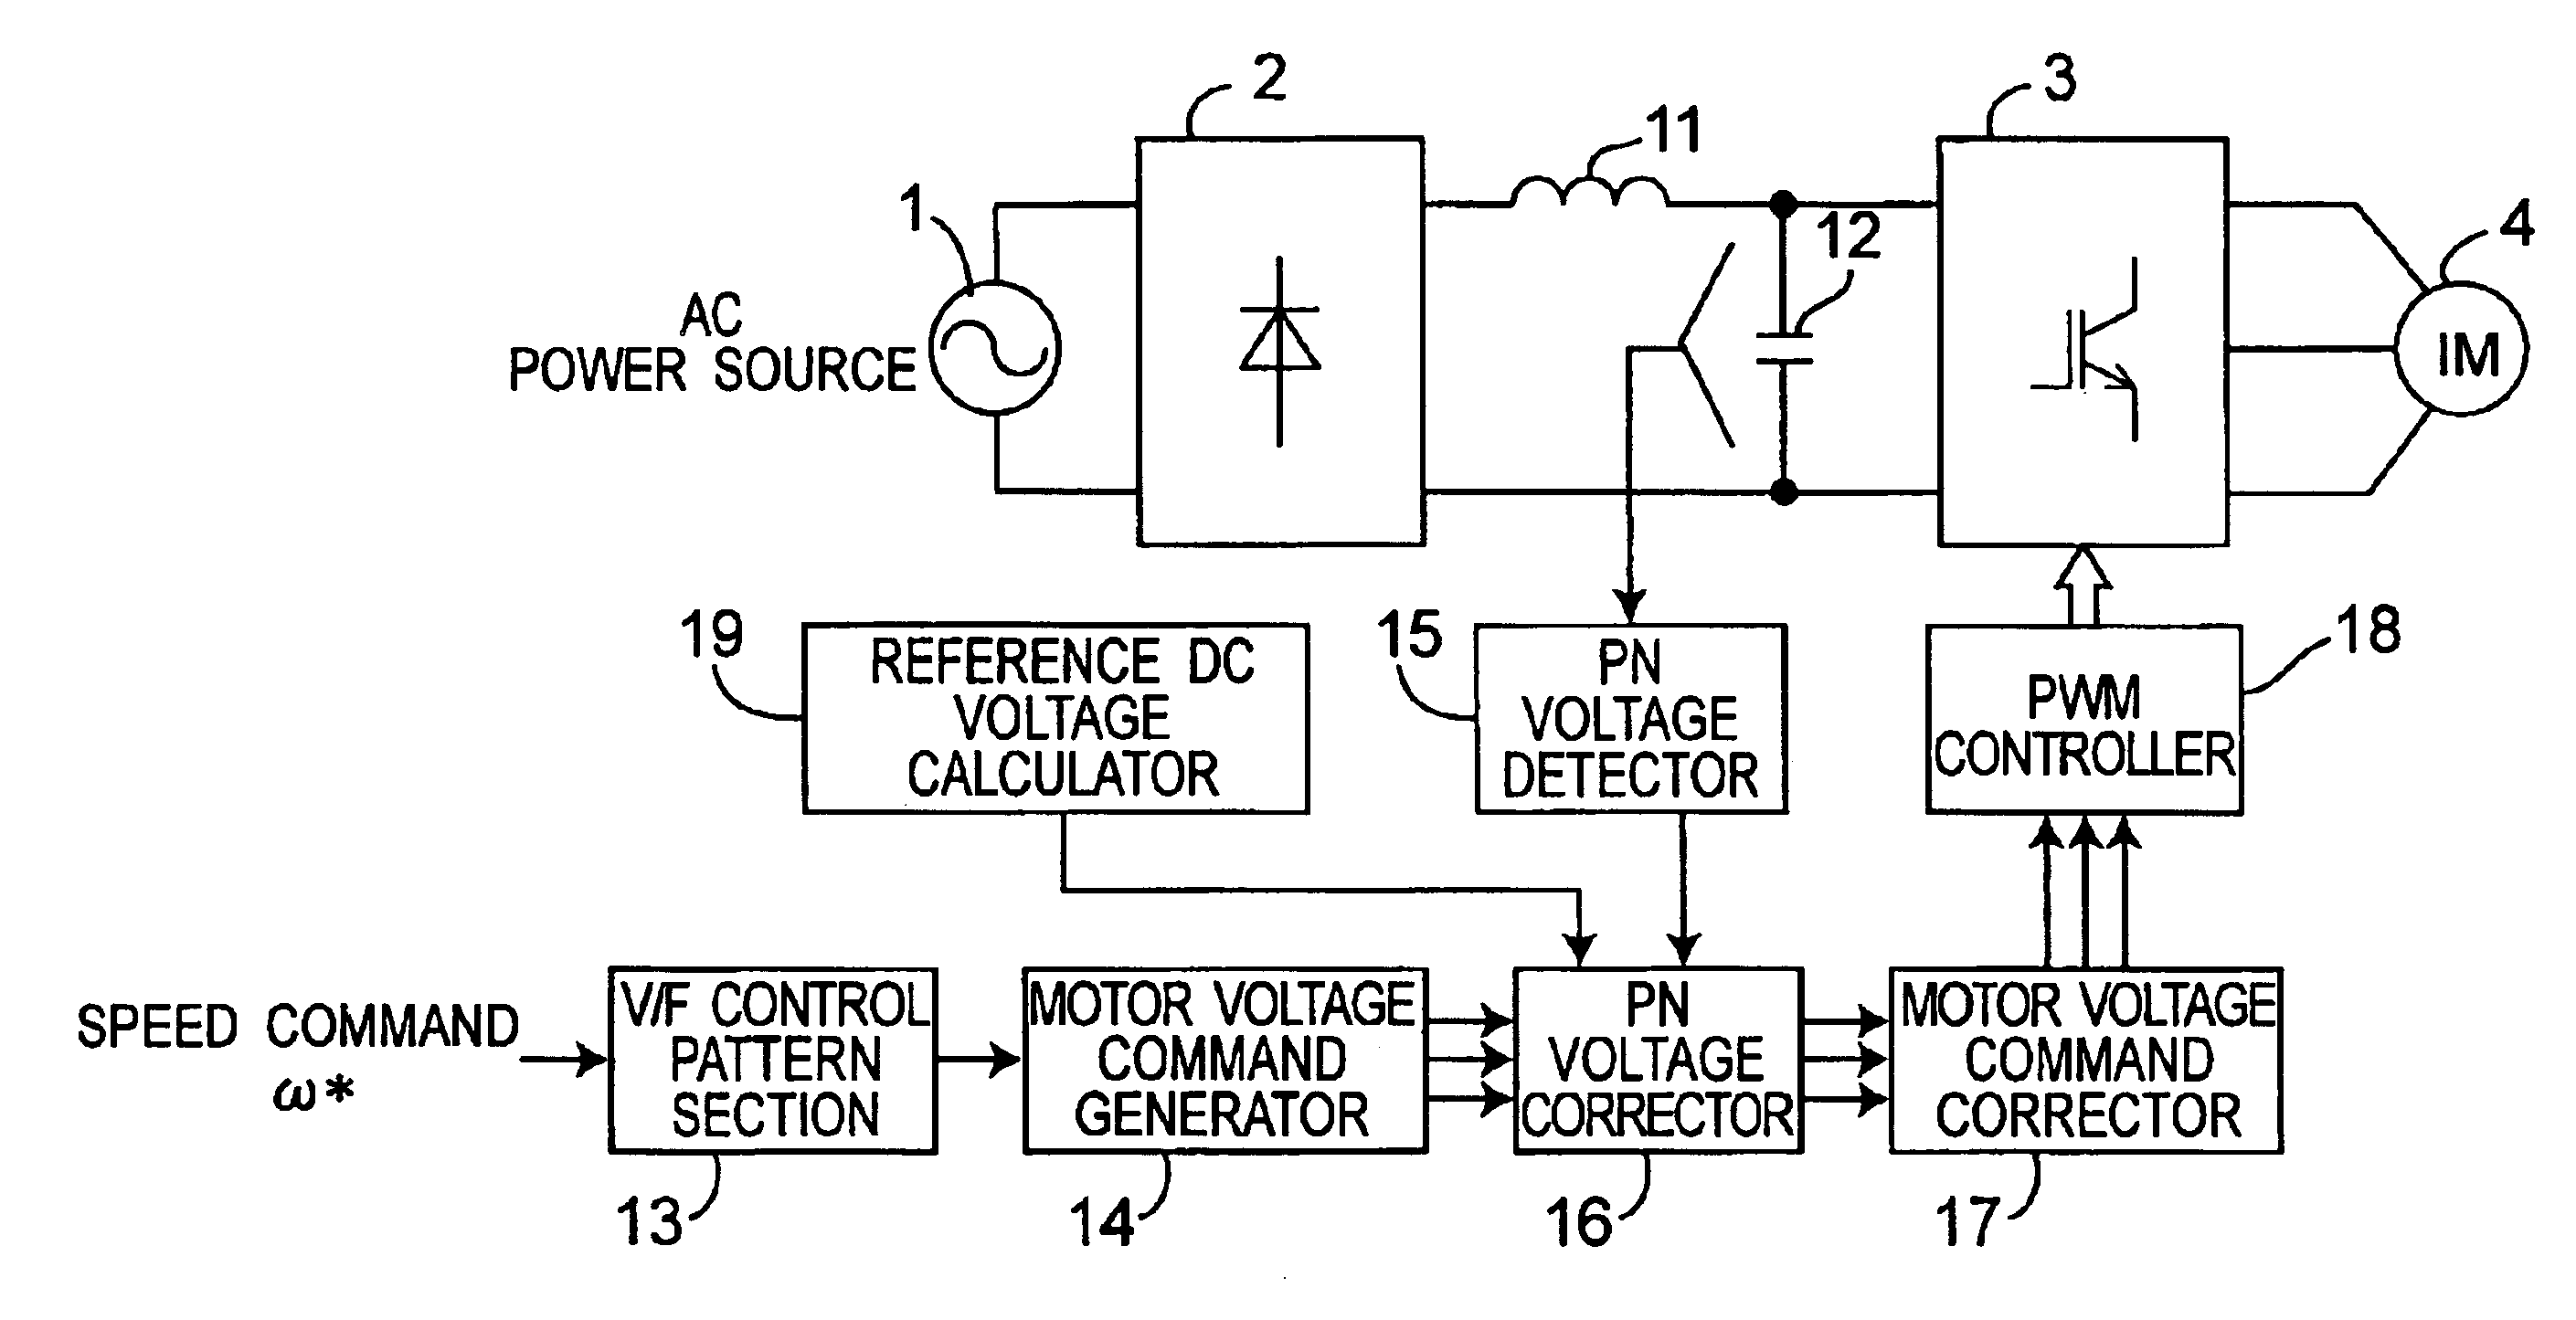 Inverter control device for driving a motor and an air conditioner